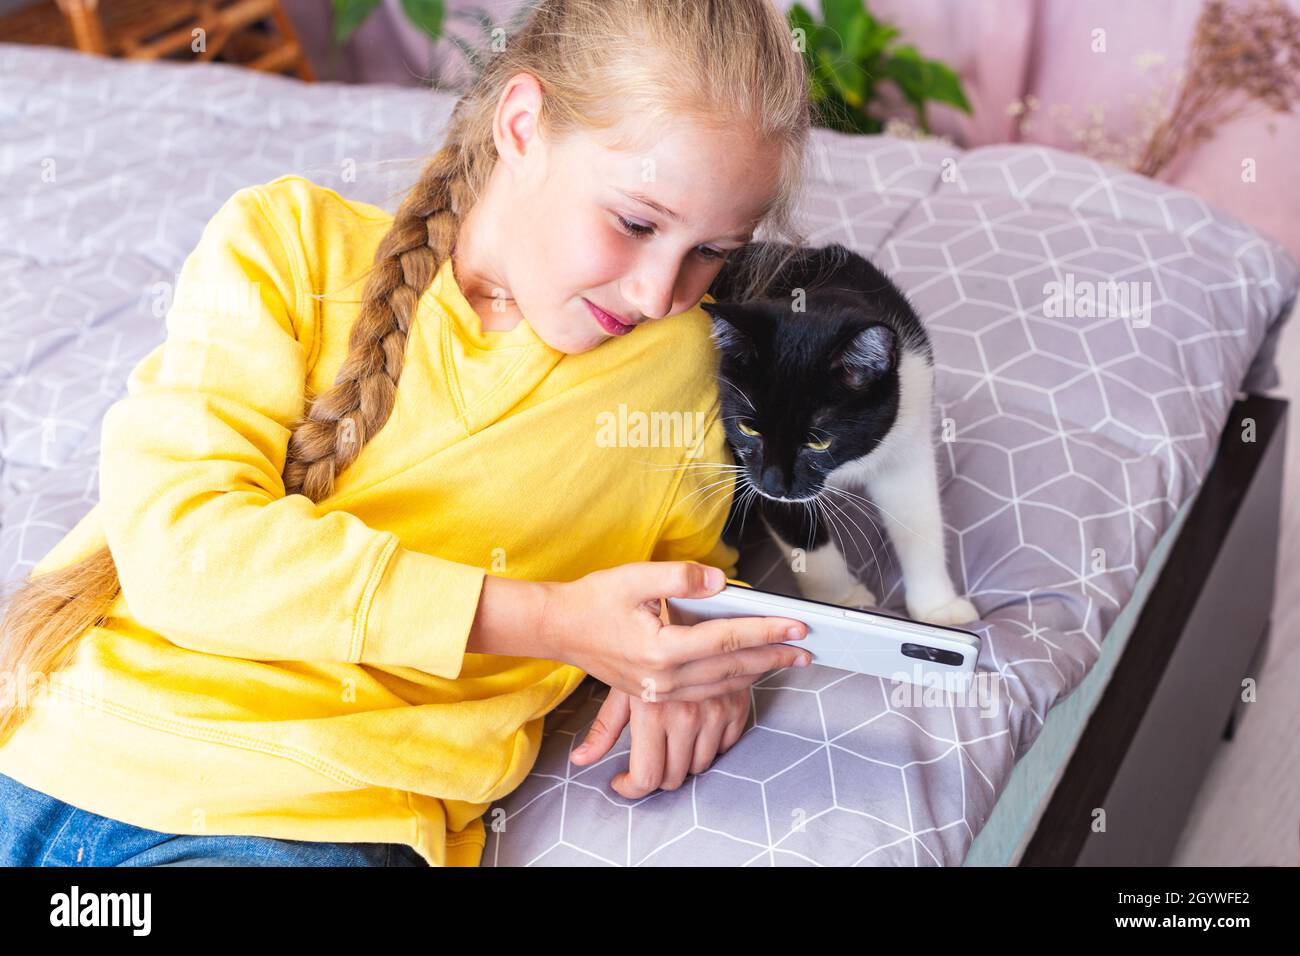 Black and white cat looks at the smartphone screen. Teenage girl with mobile phone blogging about pets, lying on the bed in her bedroom with her cat Stock Photo